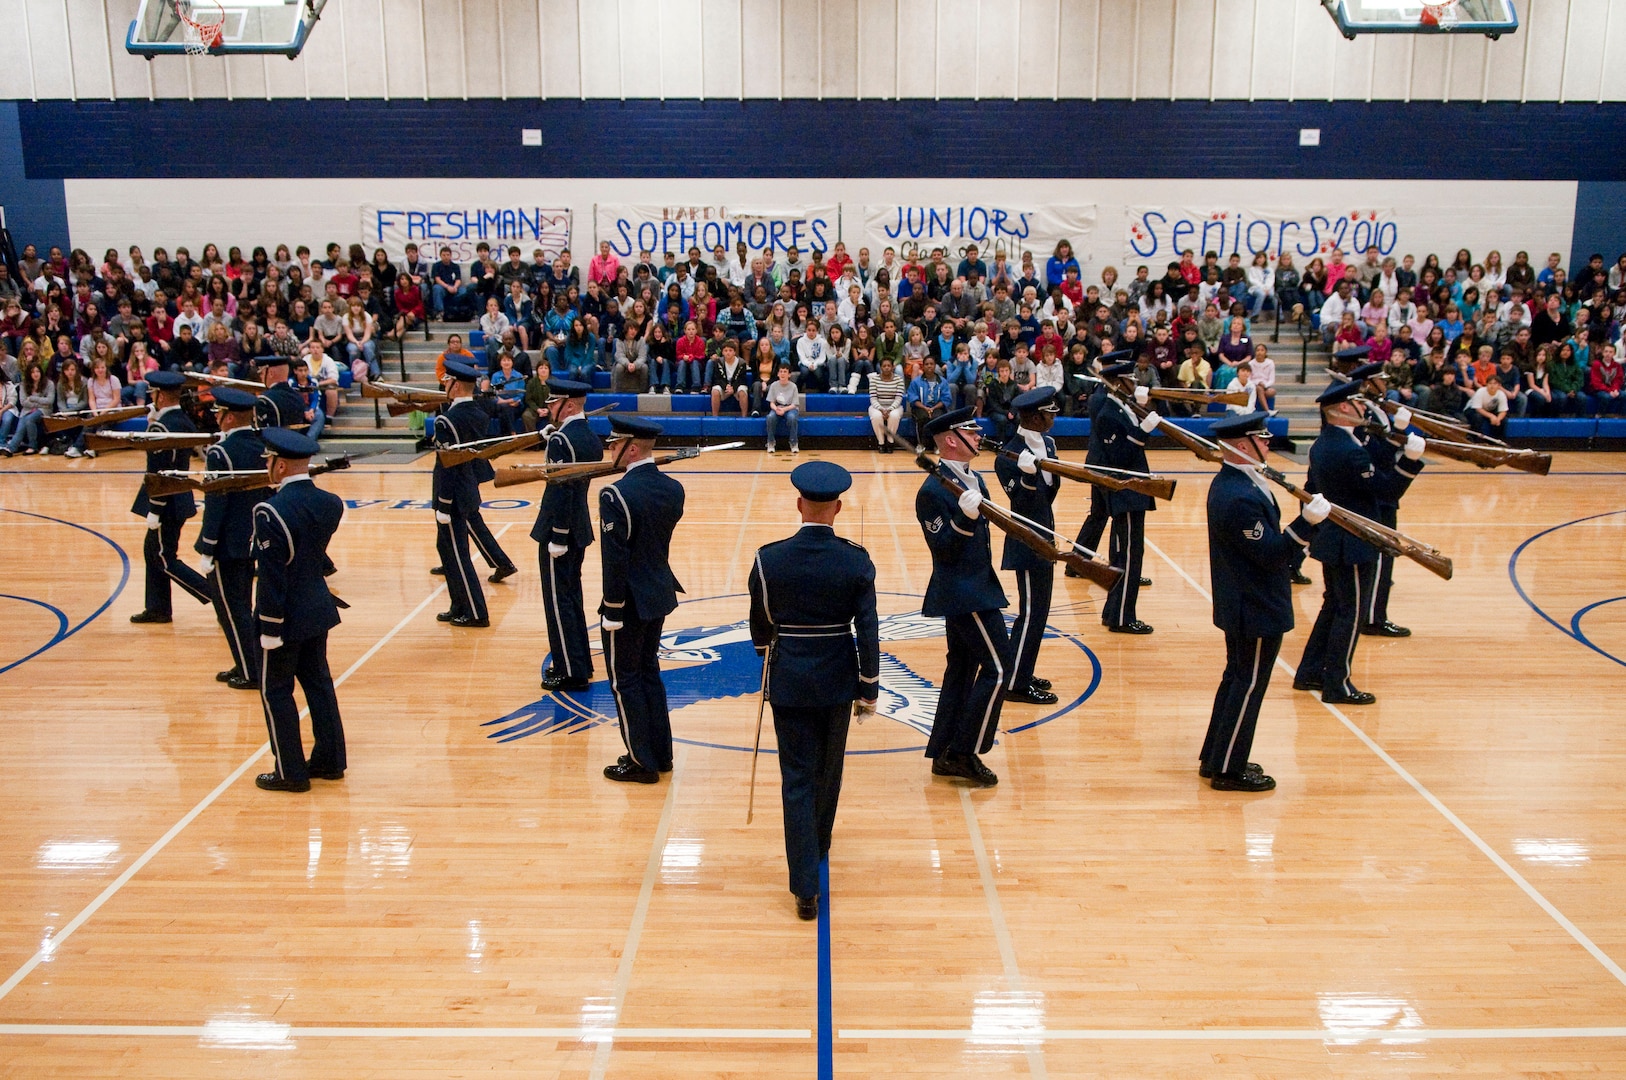 Members of the U.S. Air Force Honor Guard Drill Team perform for students of Randolph Middle School during an assembly Nov. 2. (U.S. Air Force photo/Steve Thurow)